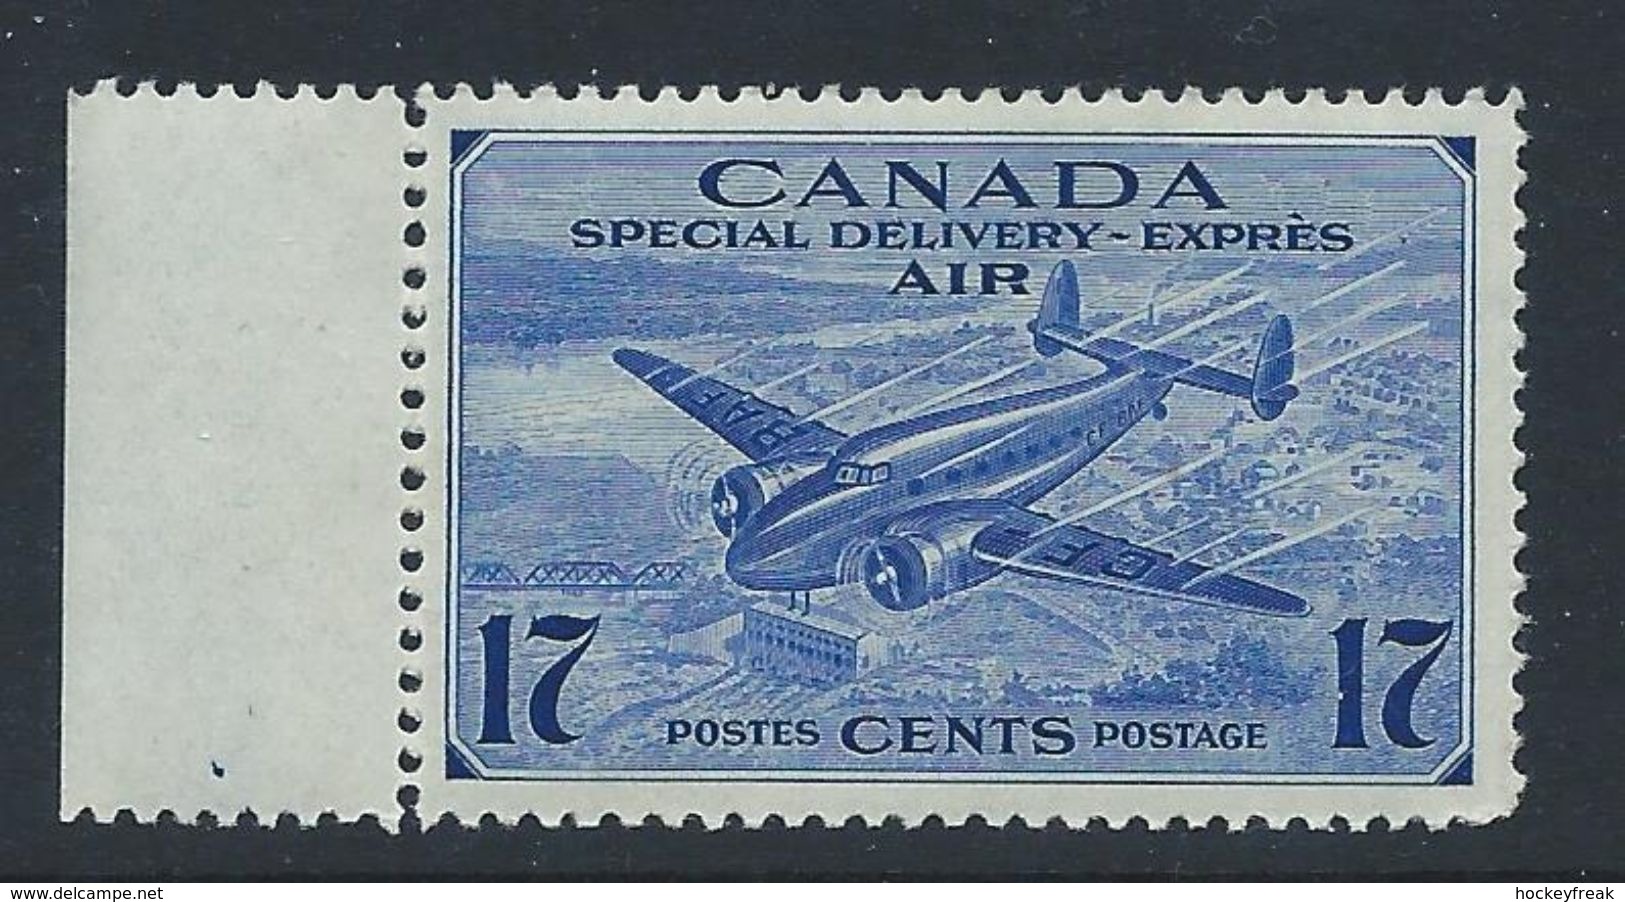 Canada 1943 - 17c Special Delivery Airmail Issue SG S14 Side Marginal MNH Cat £4.50 SG2015 - See Description/scans Below - Luftpost-Express